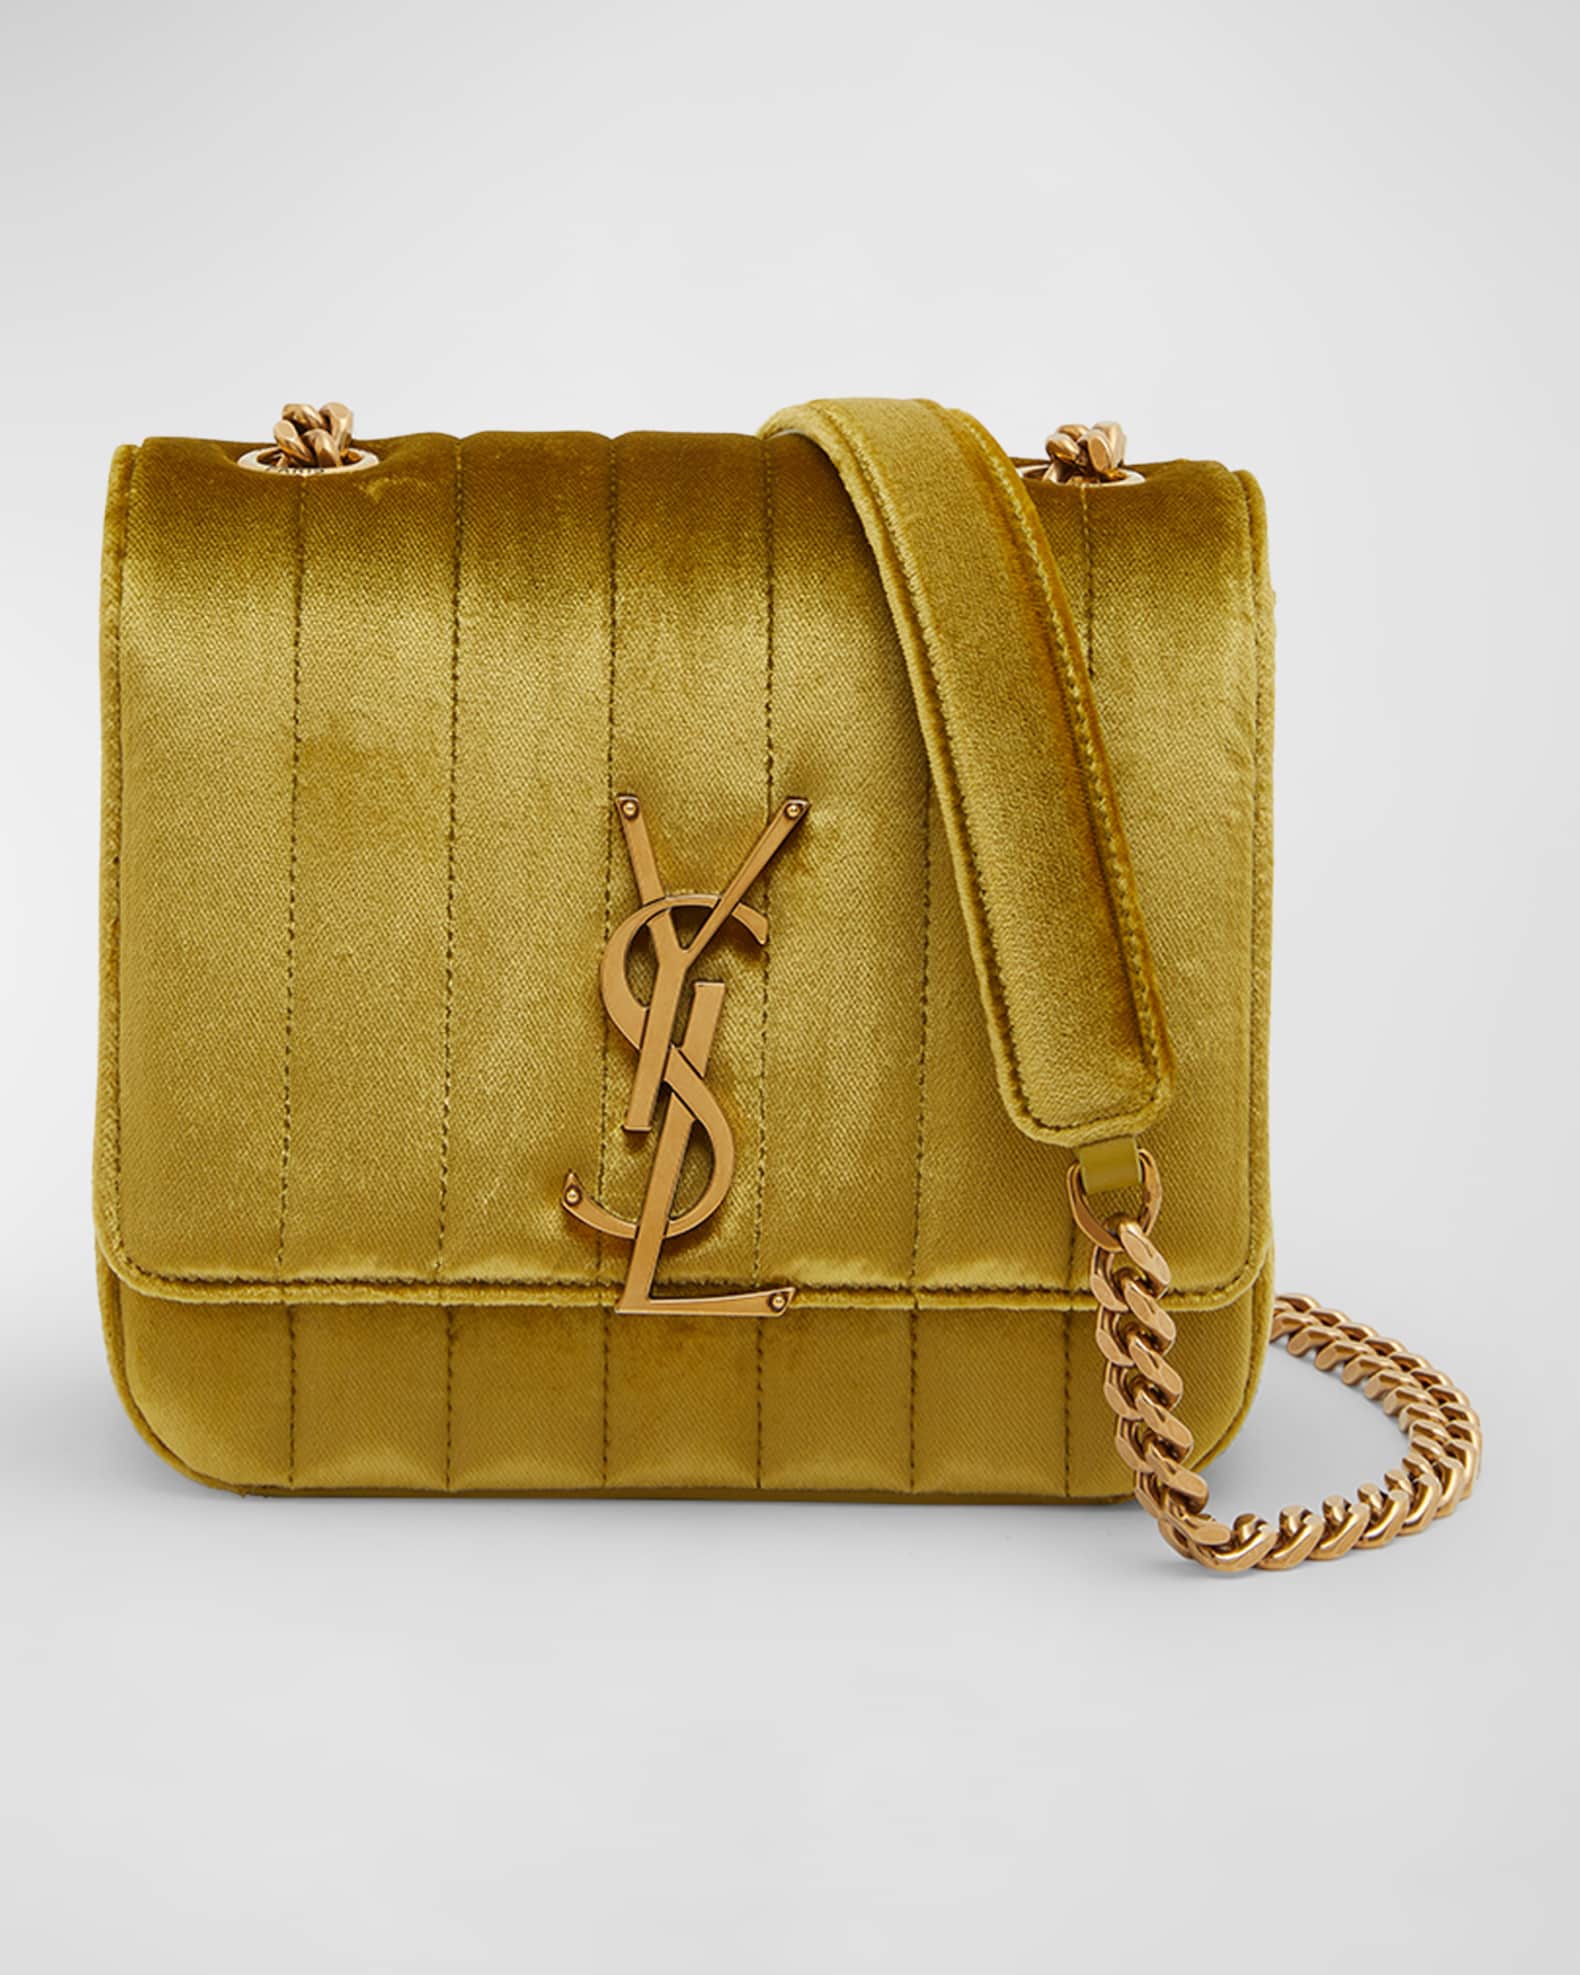 My New Baby! YSL Loulou Toy Quilted Crossbody Bag - Zoey Olivia